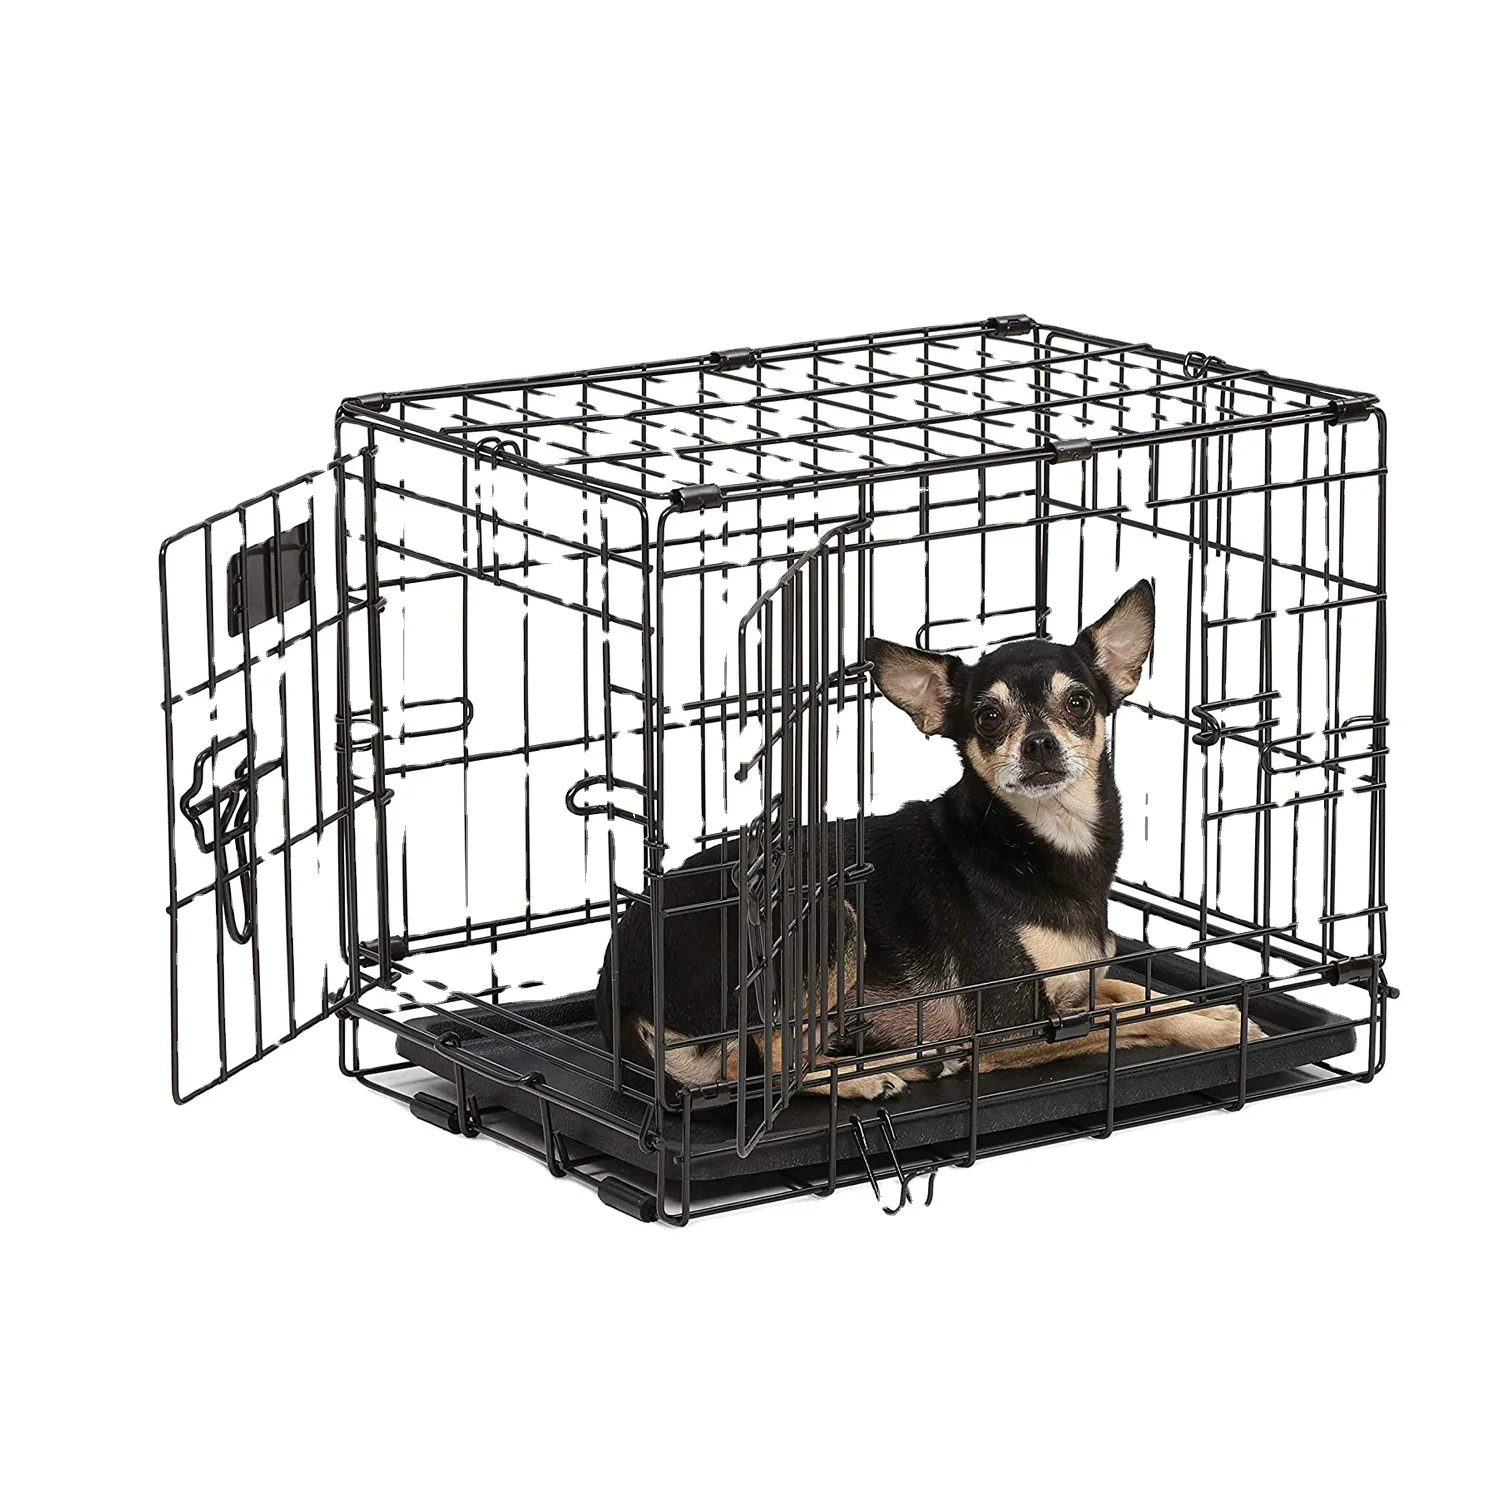 

Pet Kennel Cage Cat Dog Folding House Cages Steel Crate Animal Playpen Wire Metal Set-up And Fold-down In Seconds Pet Home, Black